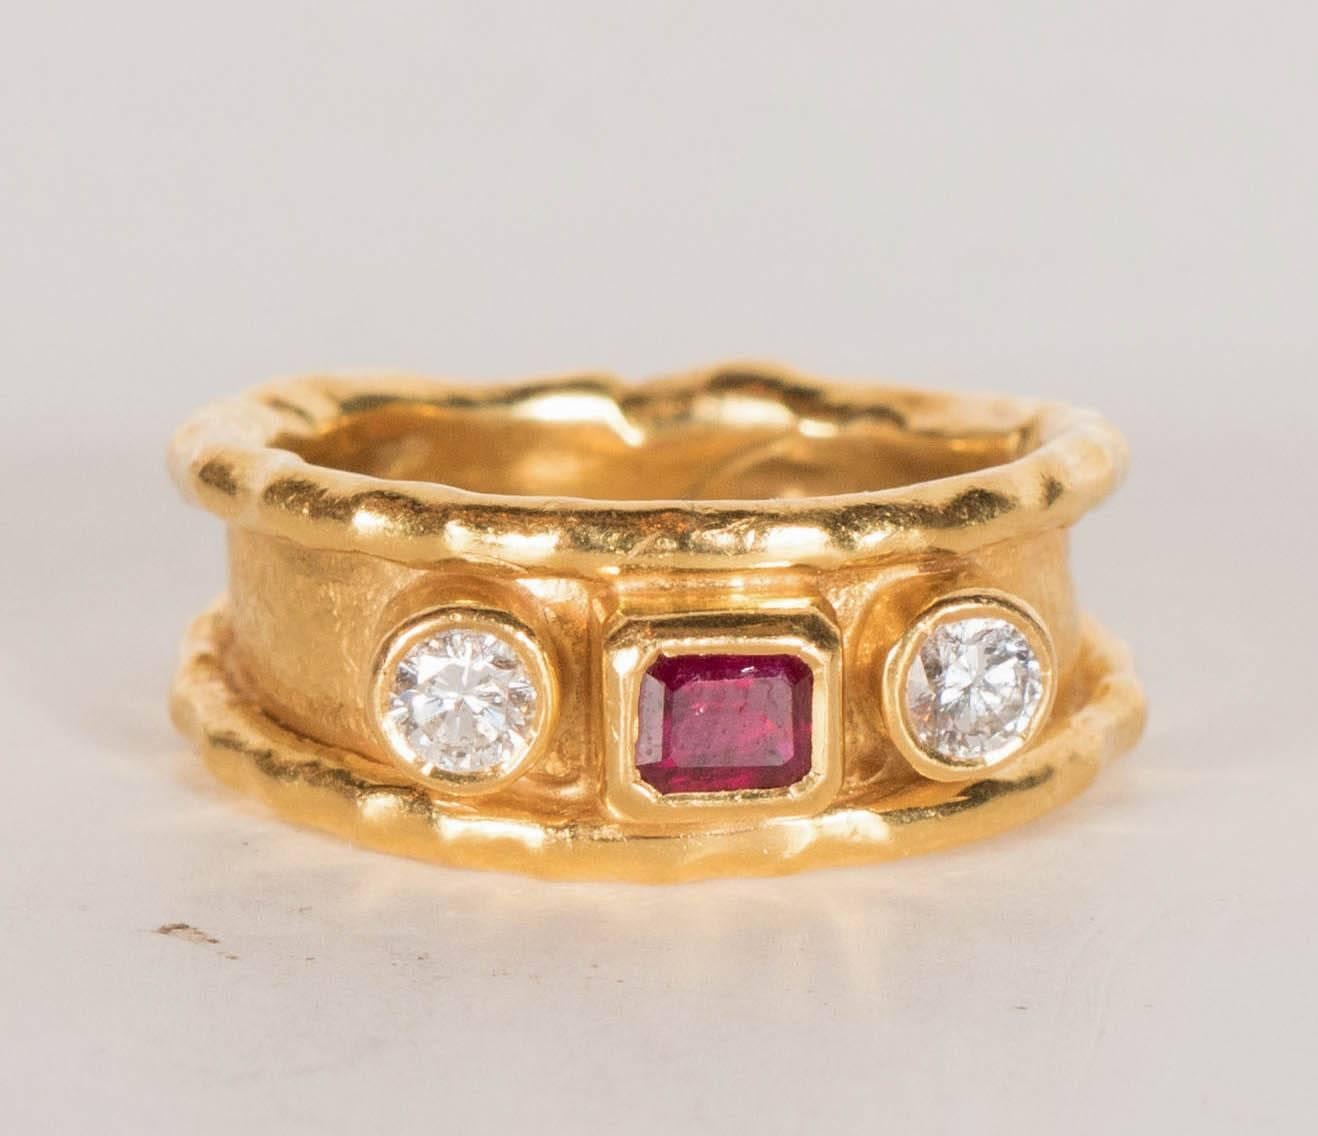 This stunning ring is Hand made sophisticated stylish  created by Jean Mahie in the 1970's. Made of 22k yellow gold set with two diamonds approximately ½ carat also set with a center emerald cut ruby of fine quality. Hand-made, one-of-a kind and